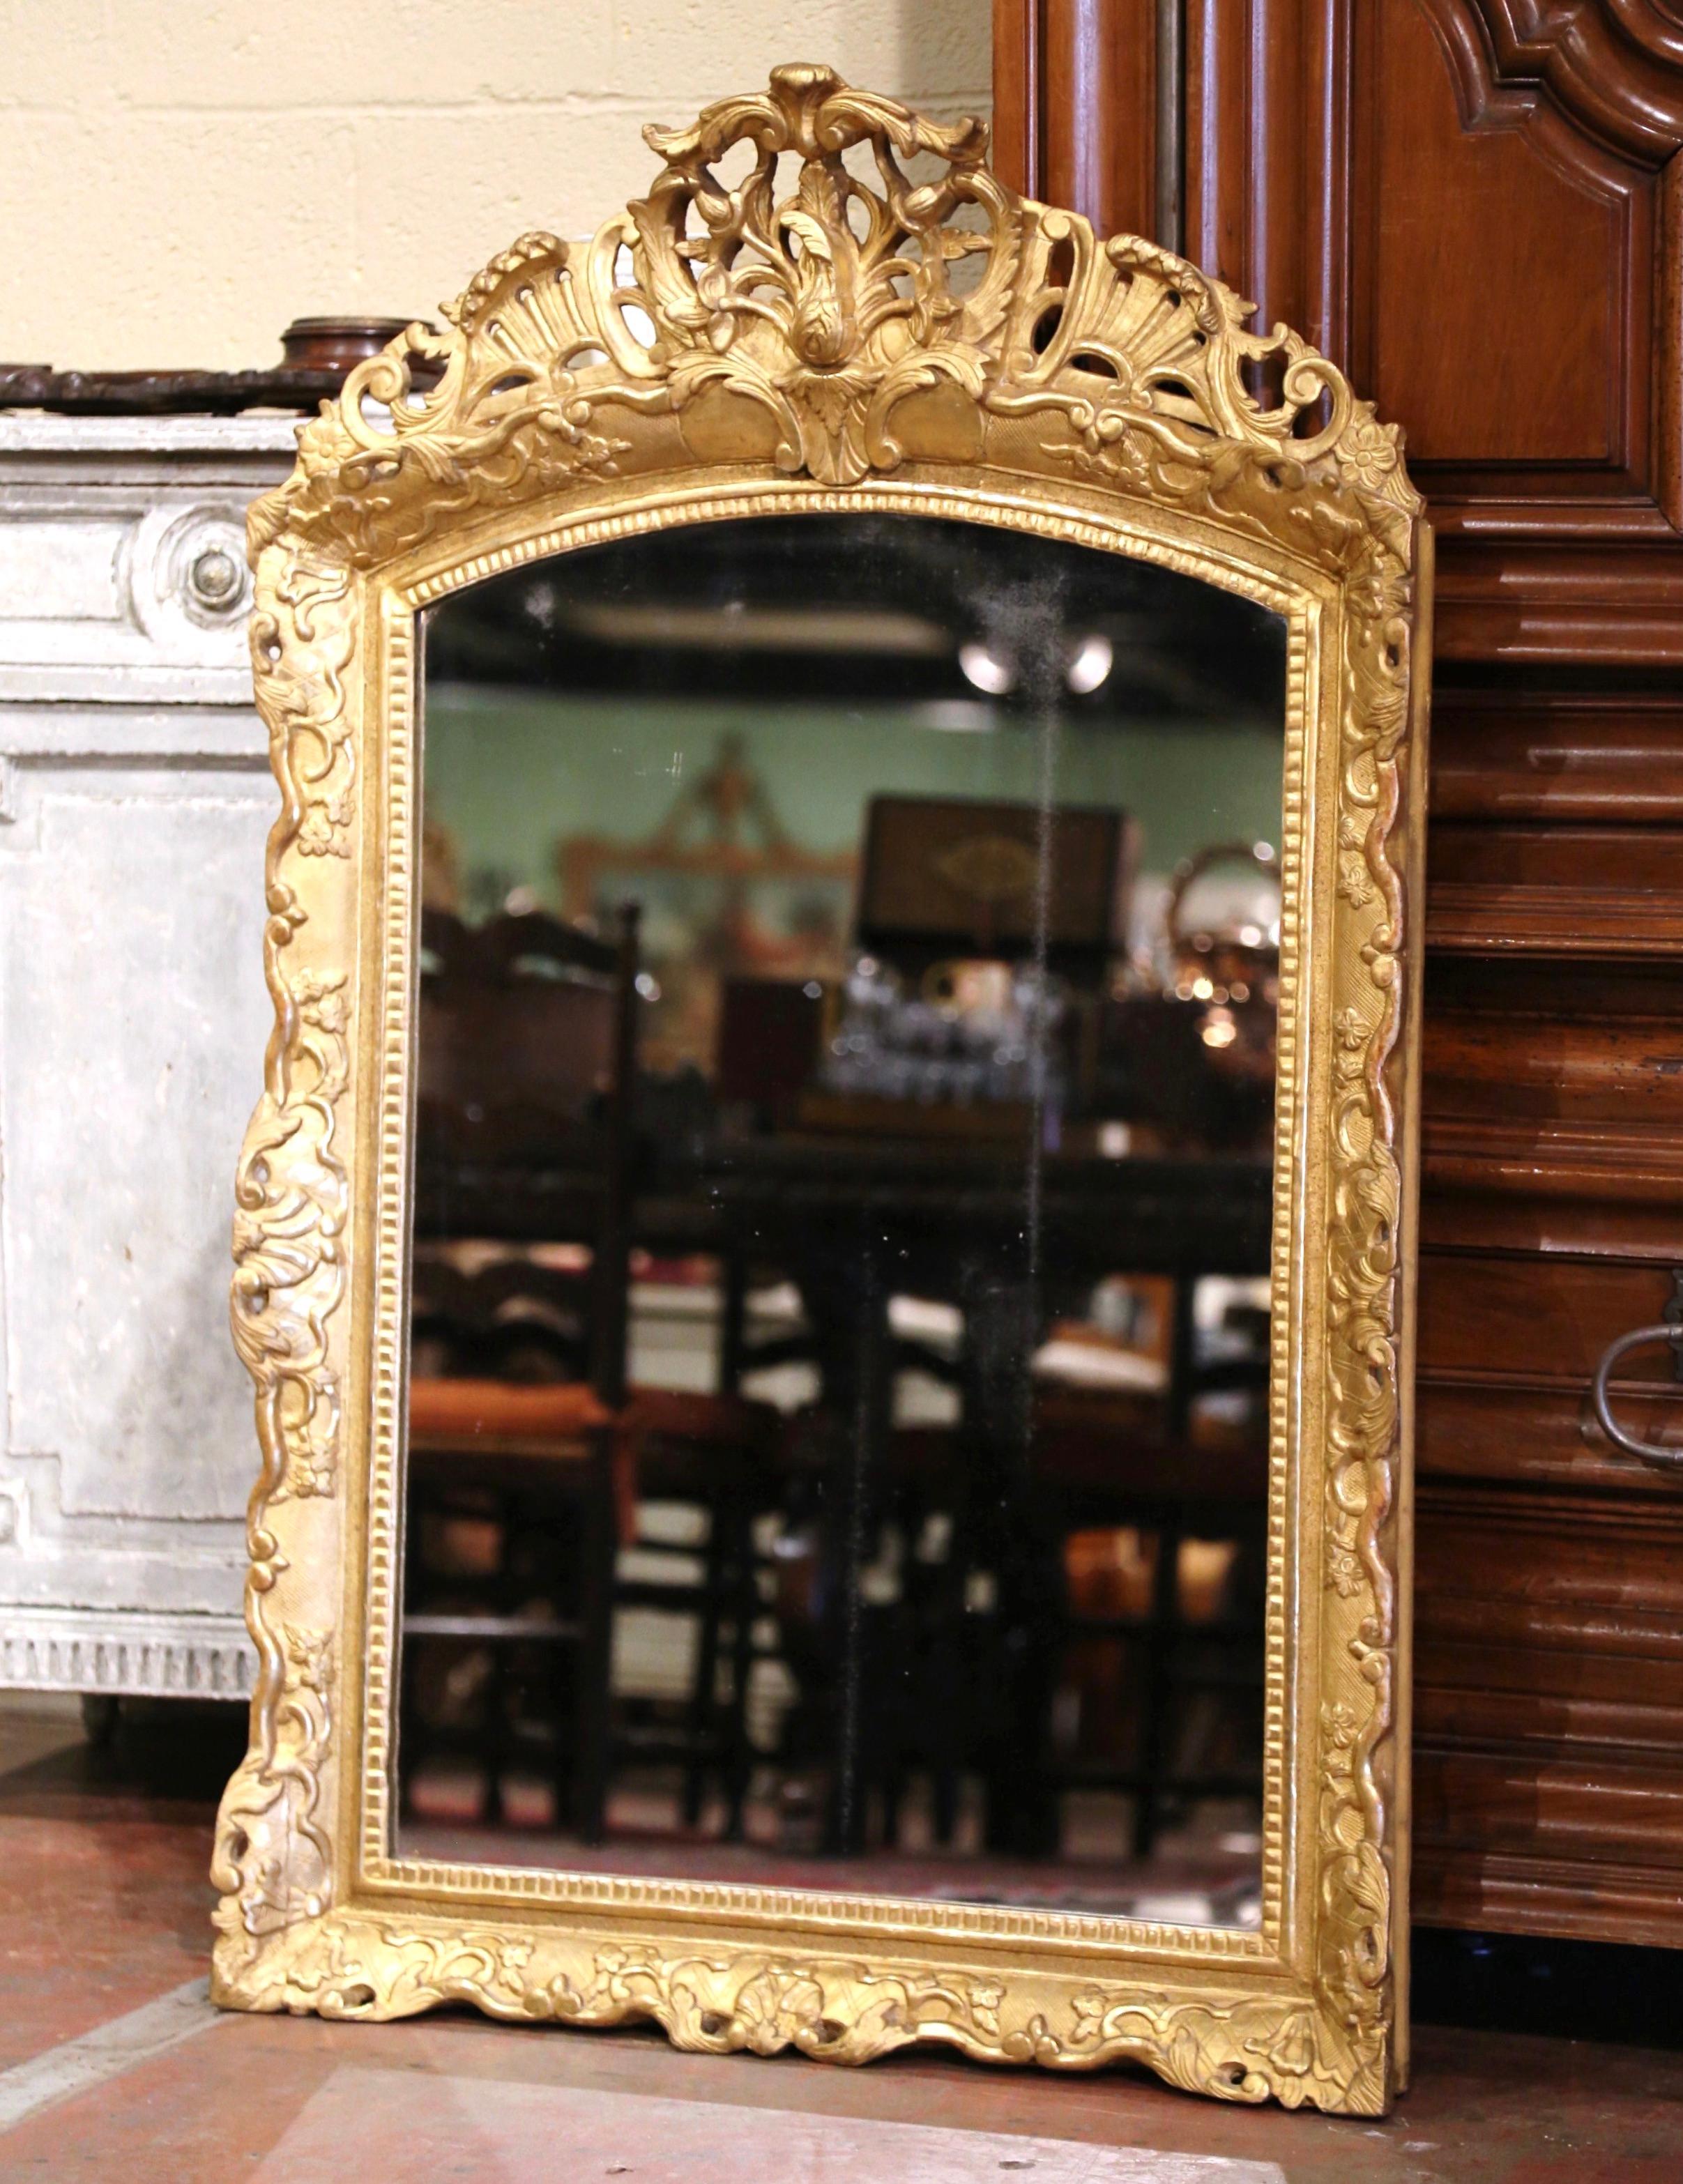 Dress a mantel with this elegant antique mirror. Crafted in Southern France, circa 1780, and arched at the top, the ornate frame features a pierced floral decor cartouche at the pediment with leaves and foliage motifs throughout. The Louis XV mirror